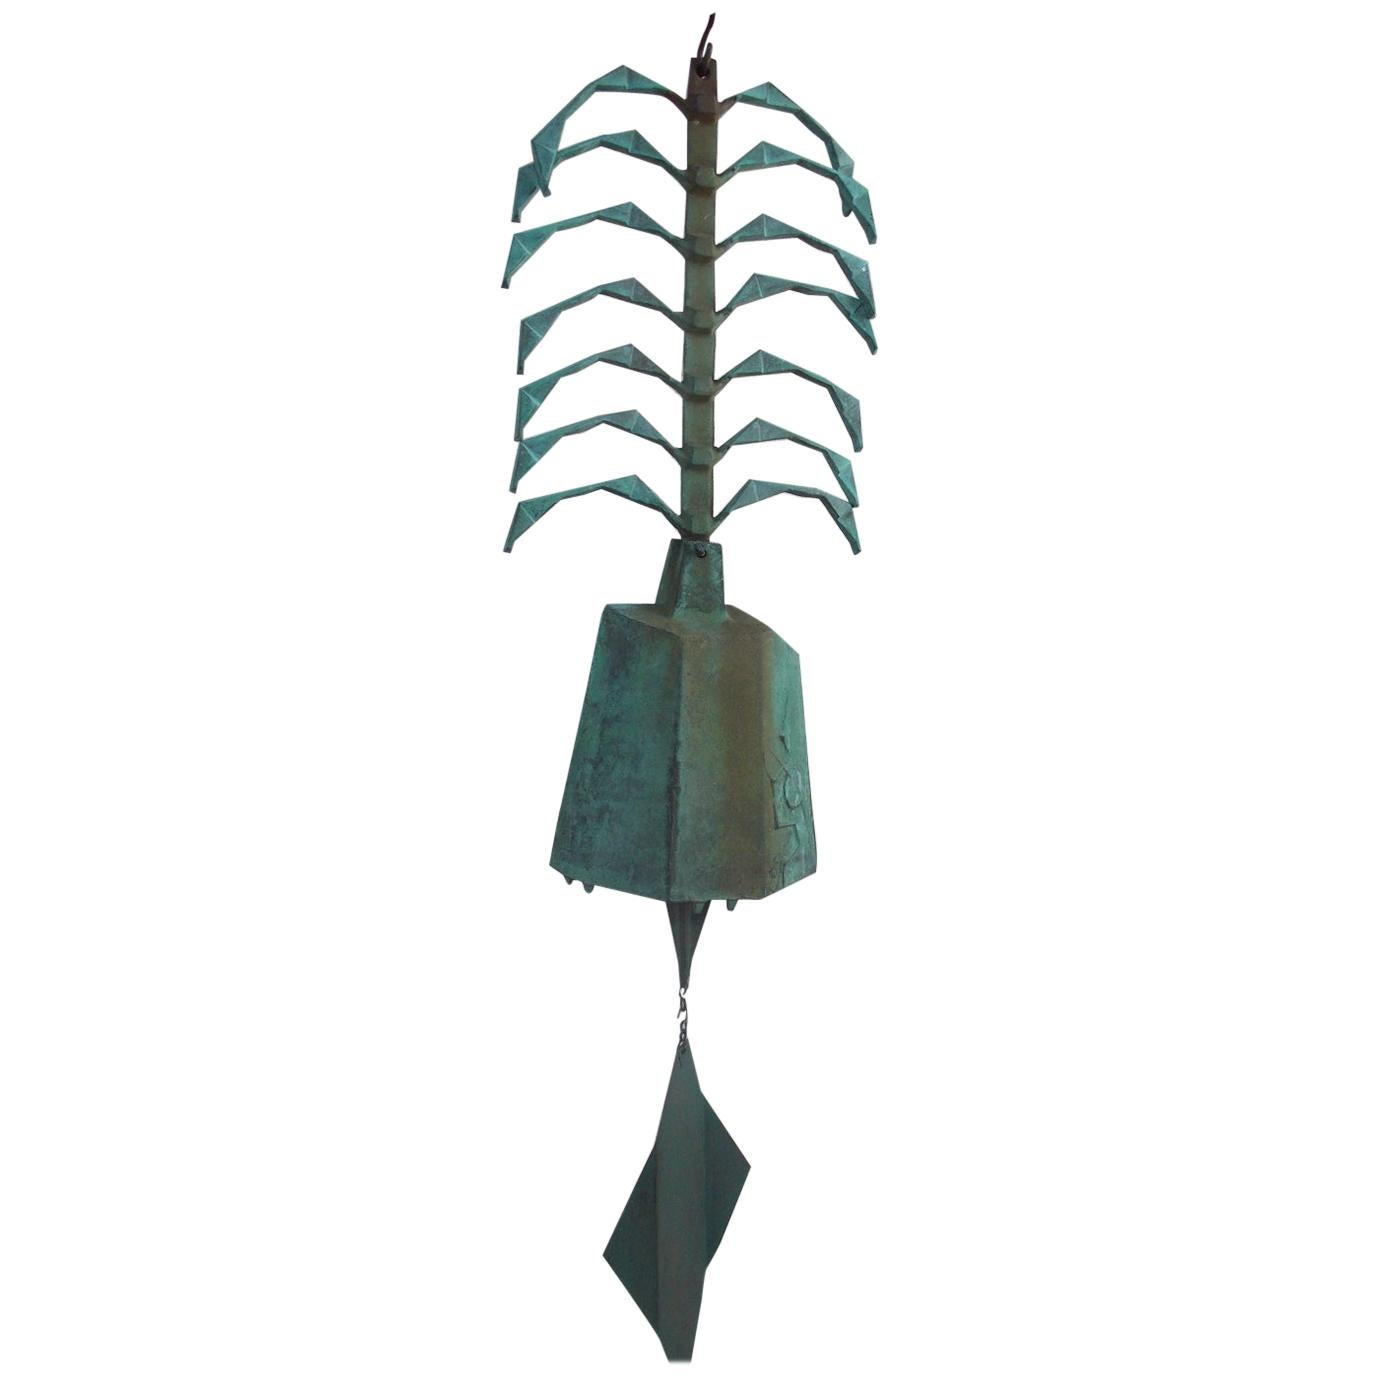 Large Paolo Soleri Ribbed Wind Chime / Bell